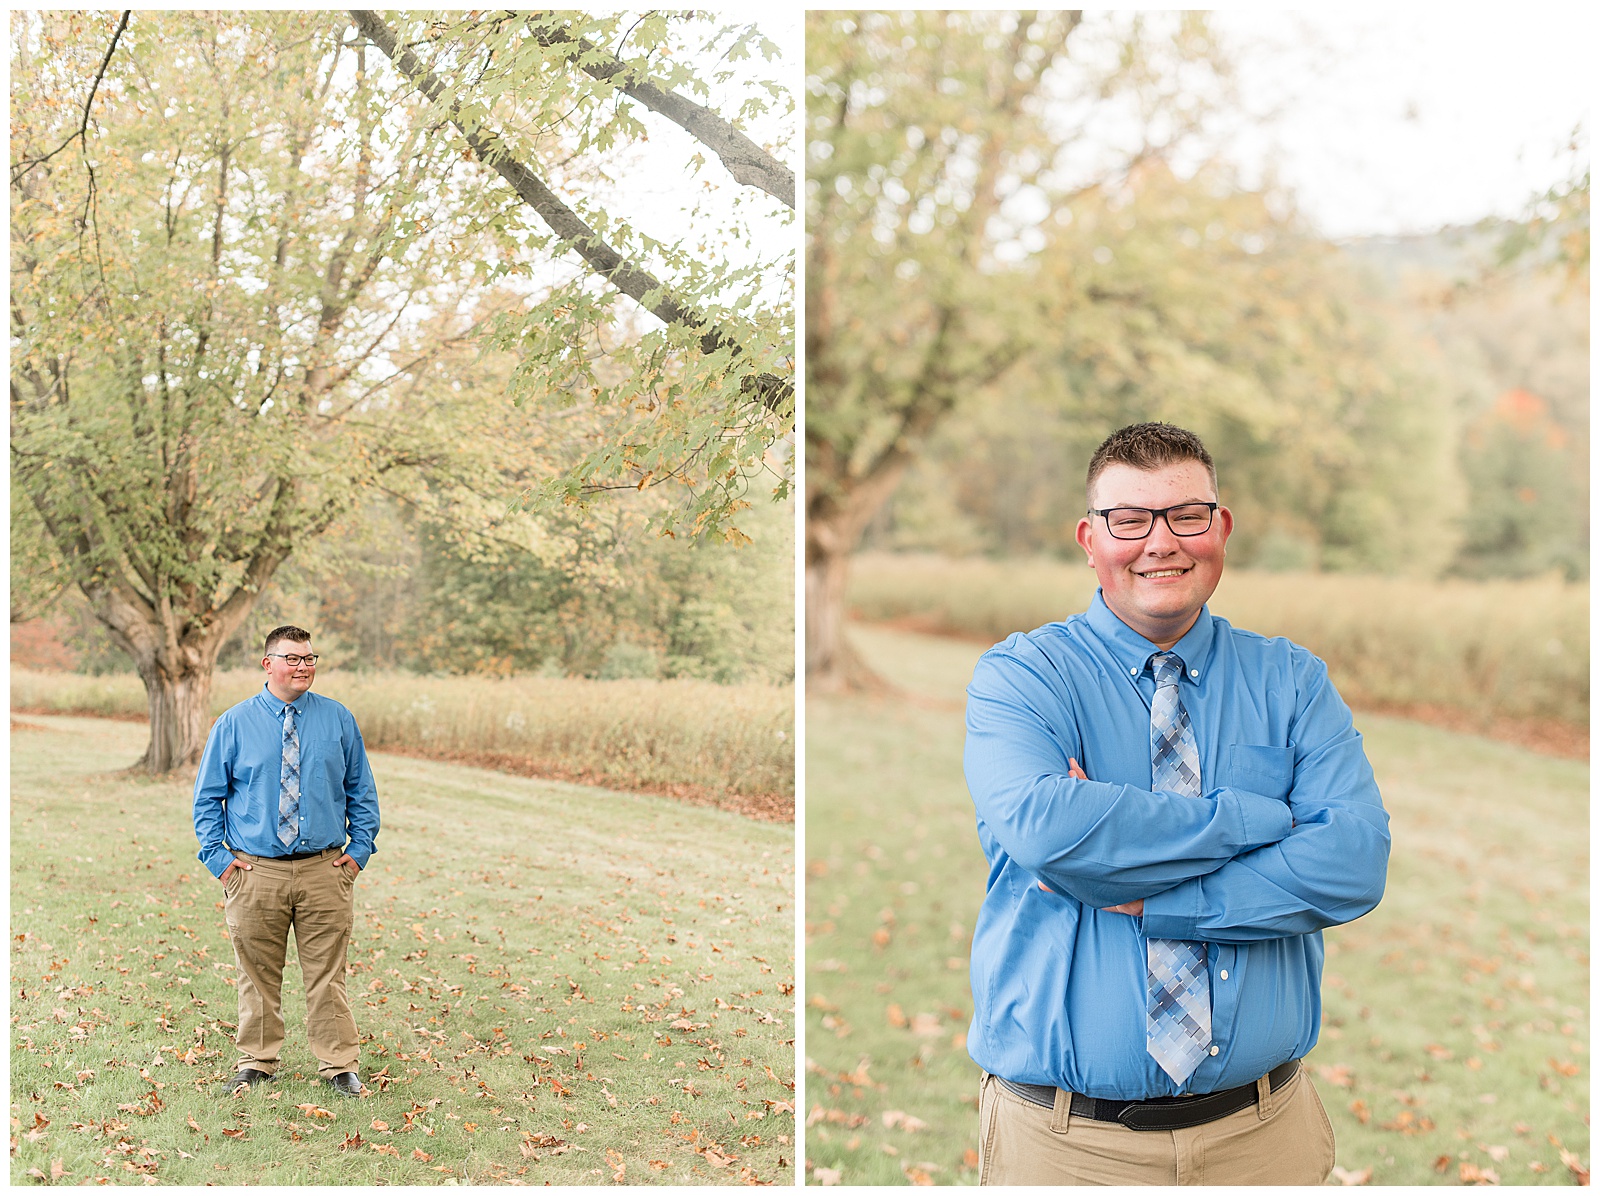 senior guy wearing bright blue dress shirt with tie and khaki pants standing in grass with hands in pockets smiling